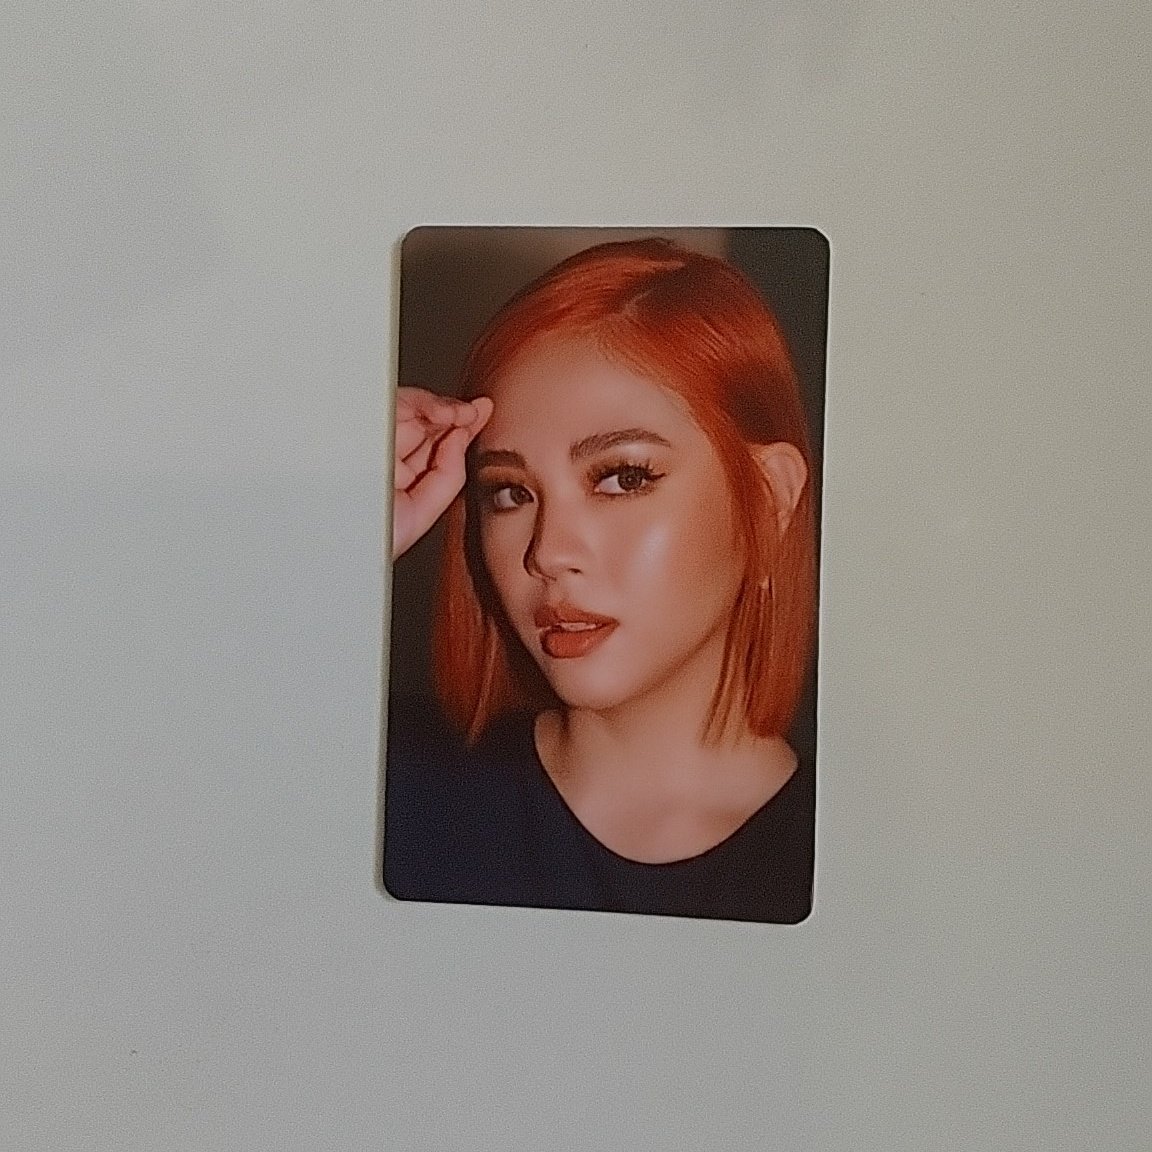 ♡ WTS LFB PH KITTEN DAY SALE ♡
HYPERSUNSETS Regina BE CAUTIOUS RPC

>>DM for price
>>PH ONLY!!
└ new, no folds, crease etc
└ payo / 1 week reservation (w/dp)

#hypersunsets #reginavanguardia #BeCautious random photocard 
PLS LIKE AND RT PO THANK U 😊😊